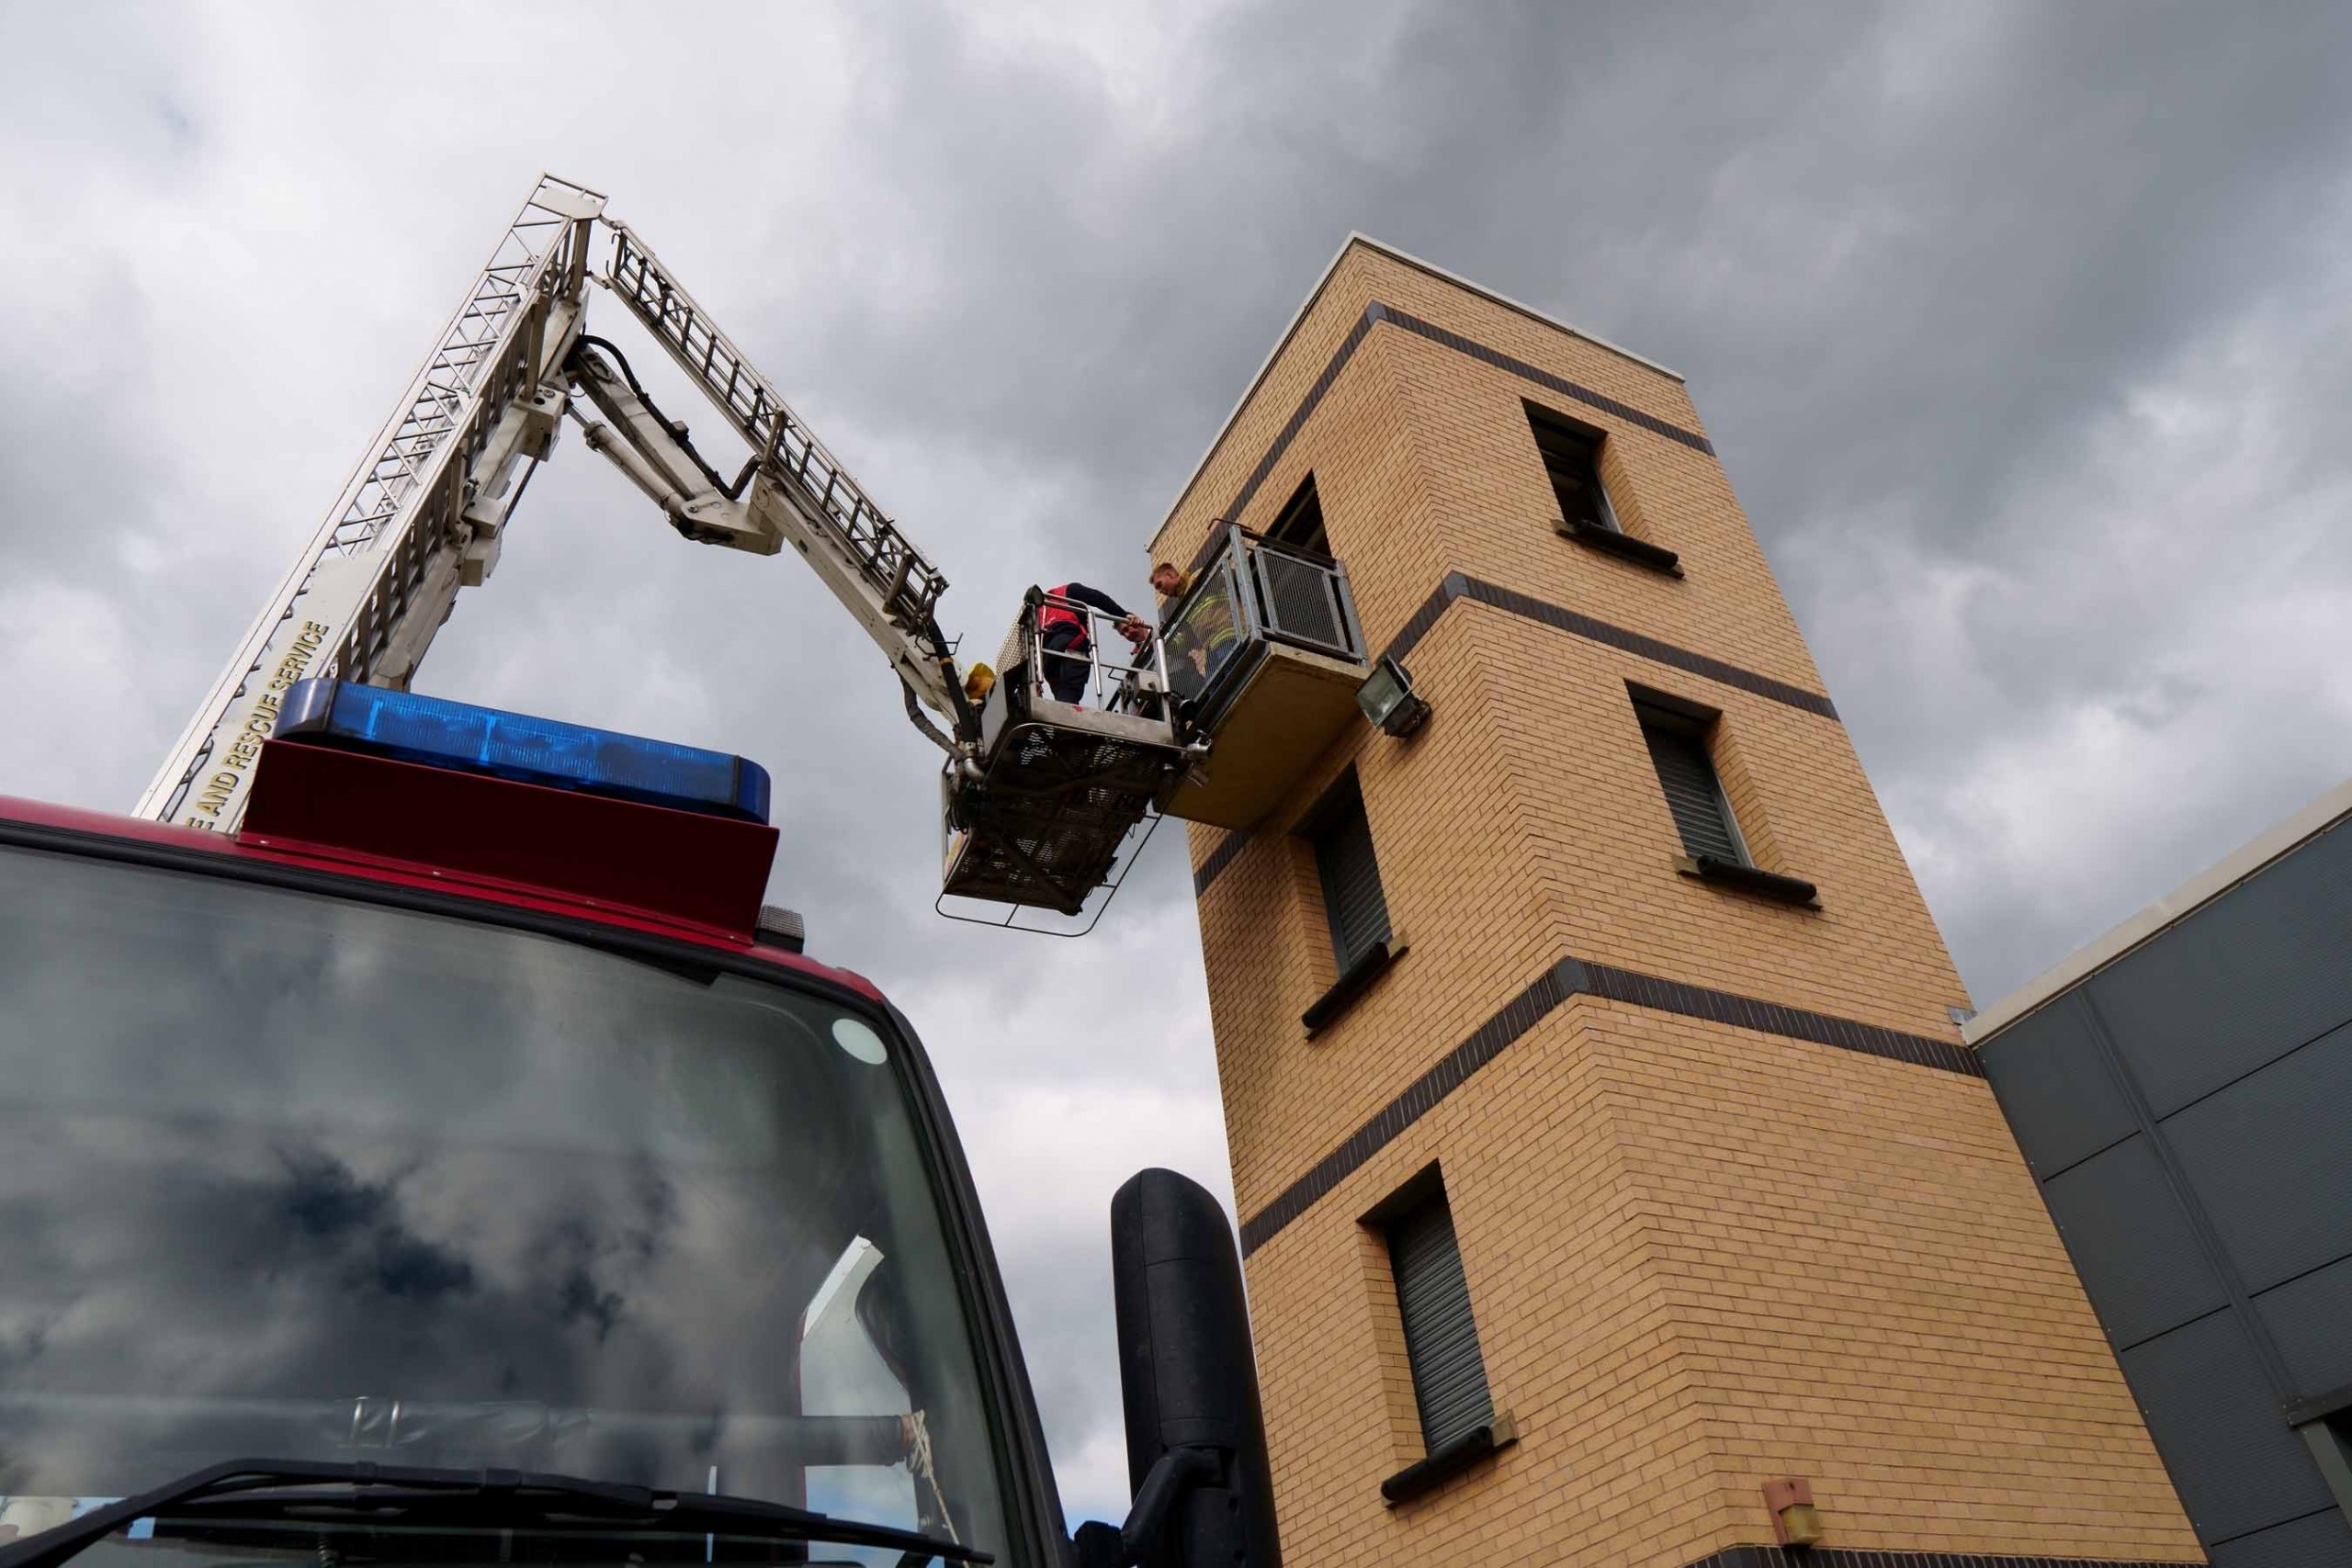 Harrogate Fire Station - rescue from the tower